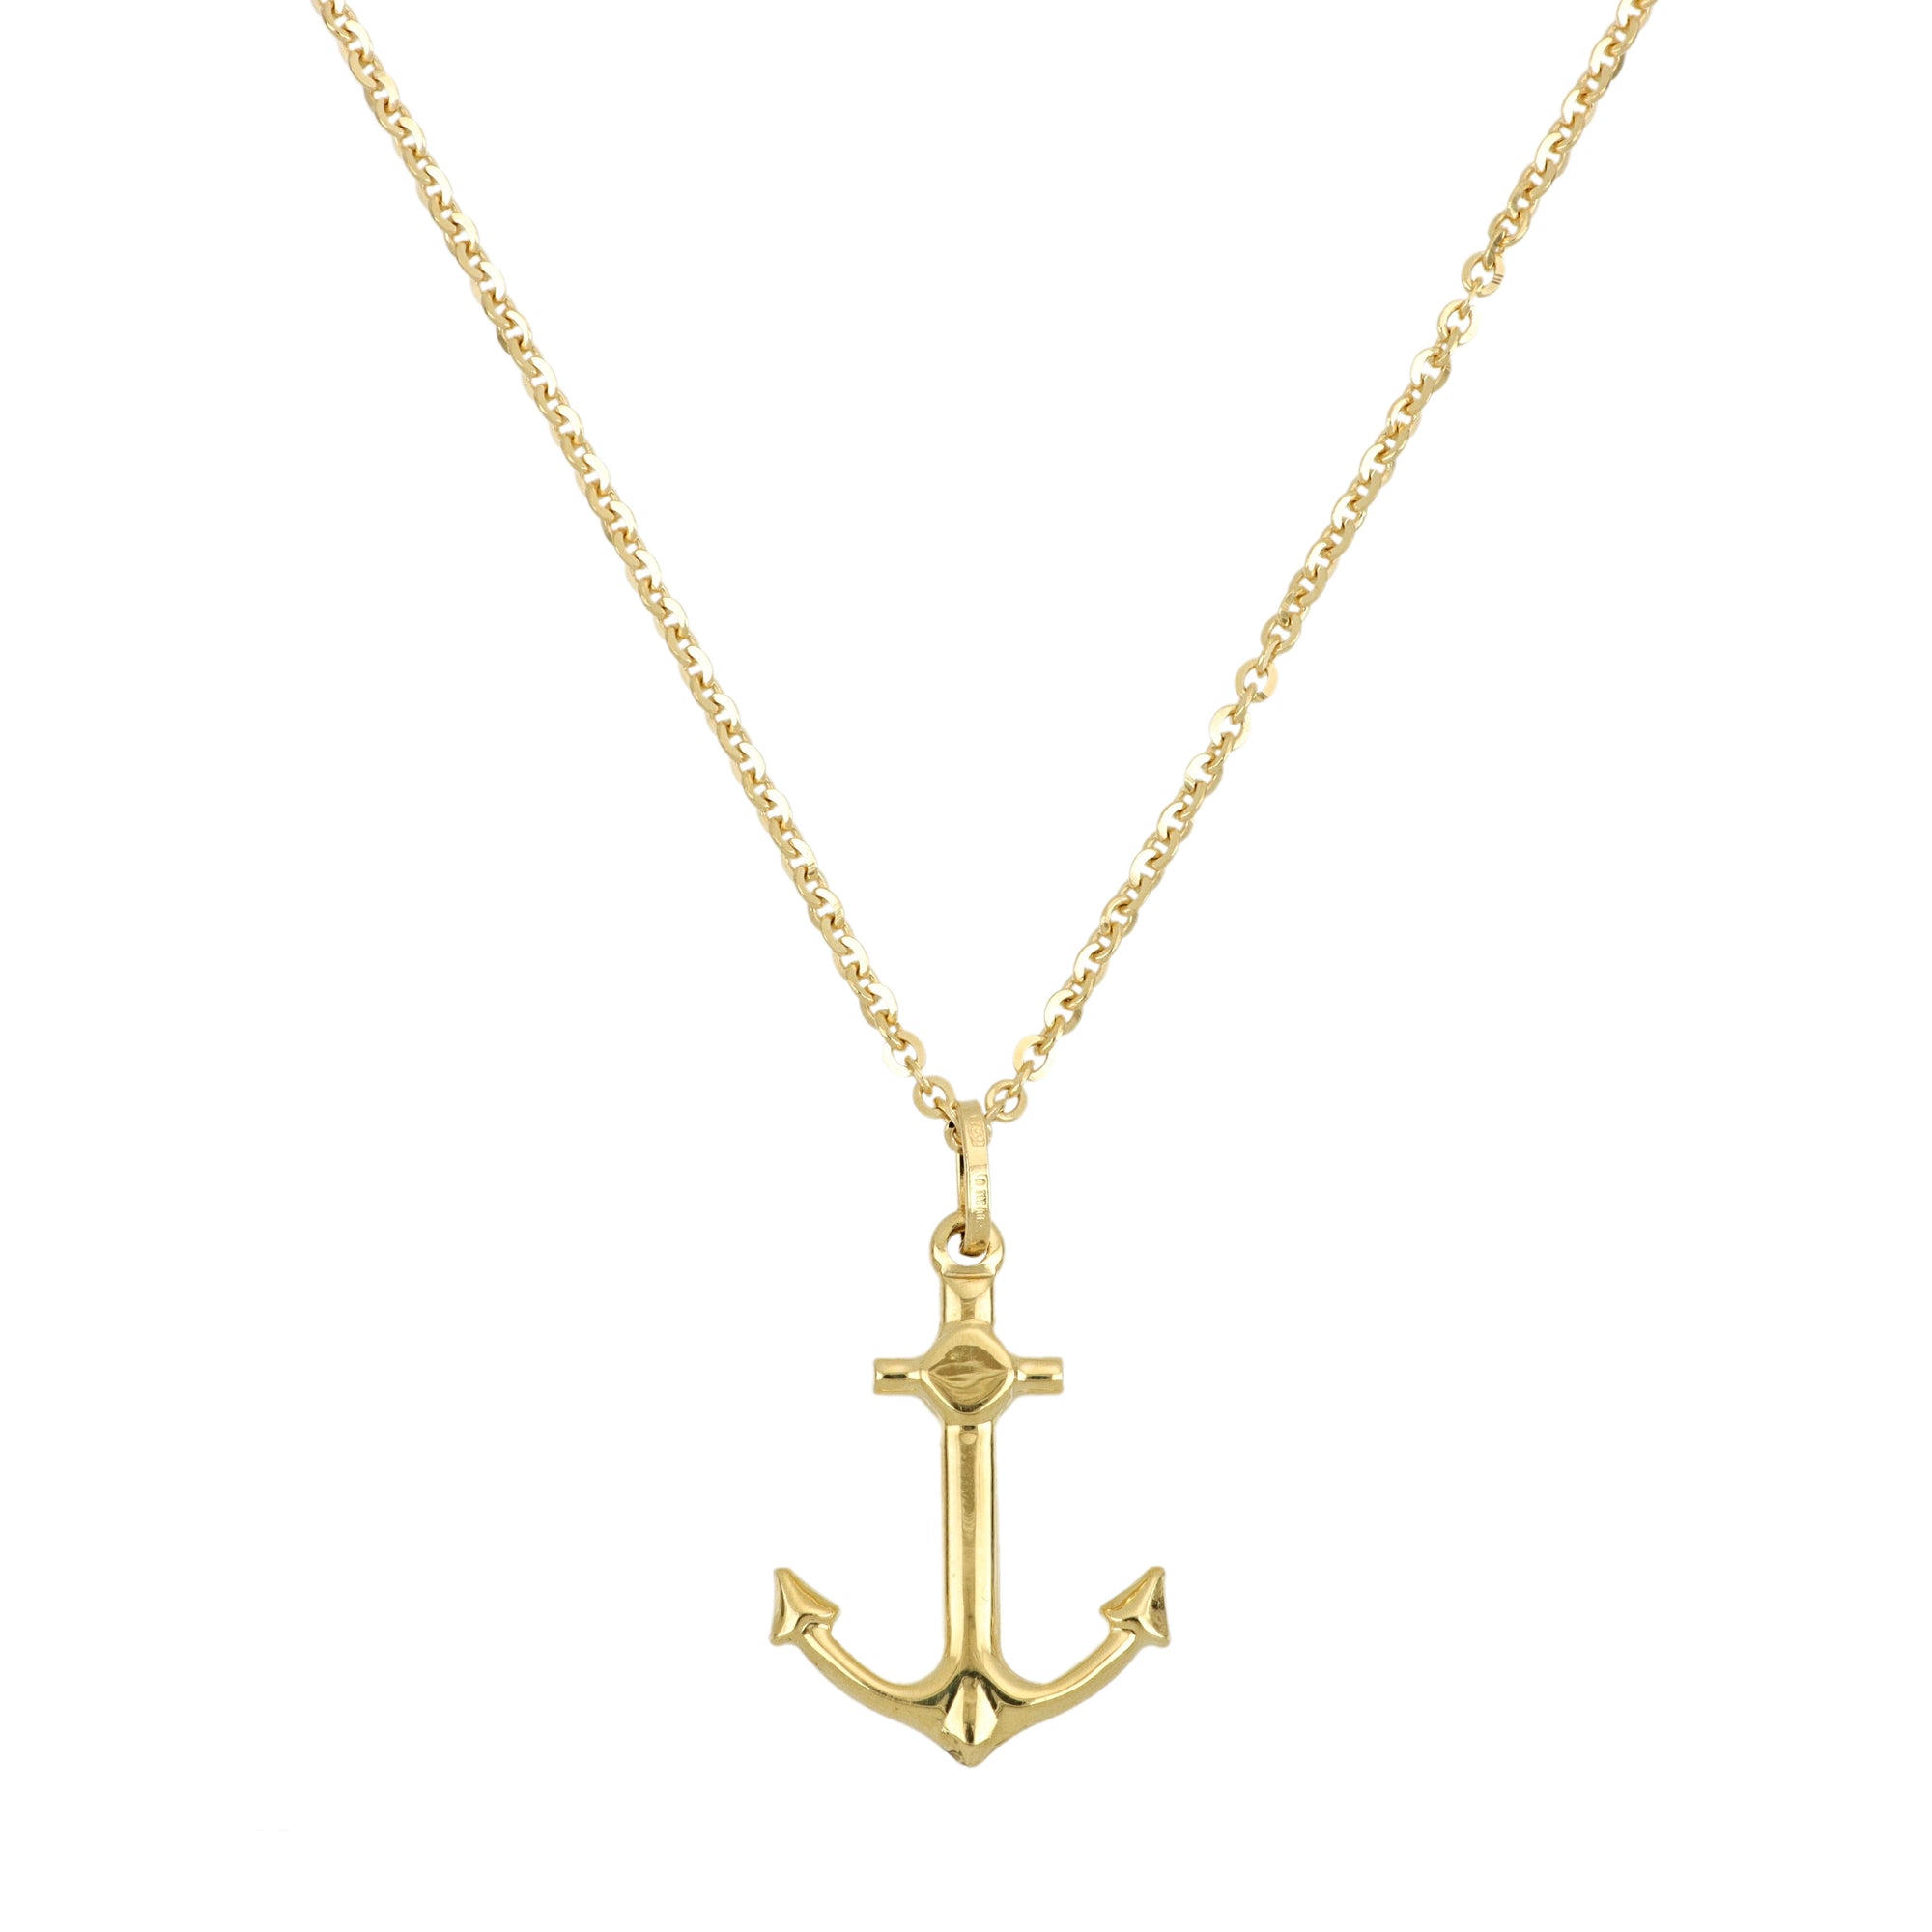 Anchor Necklace in yellow gold